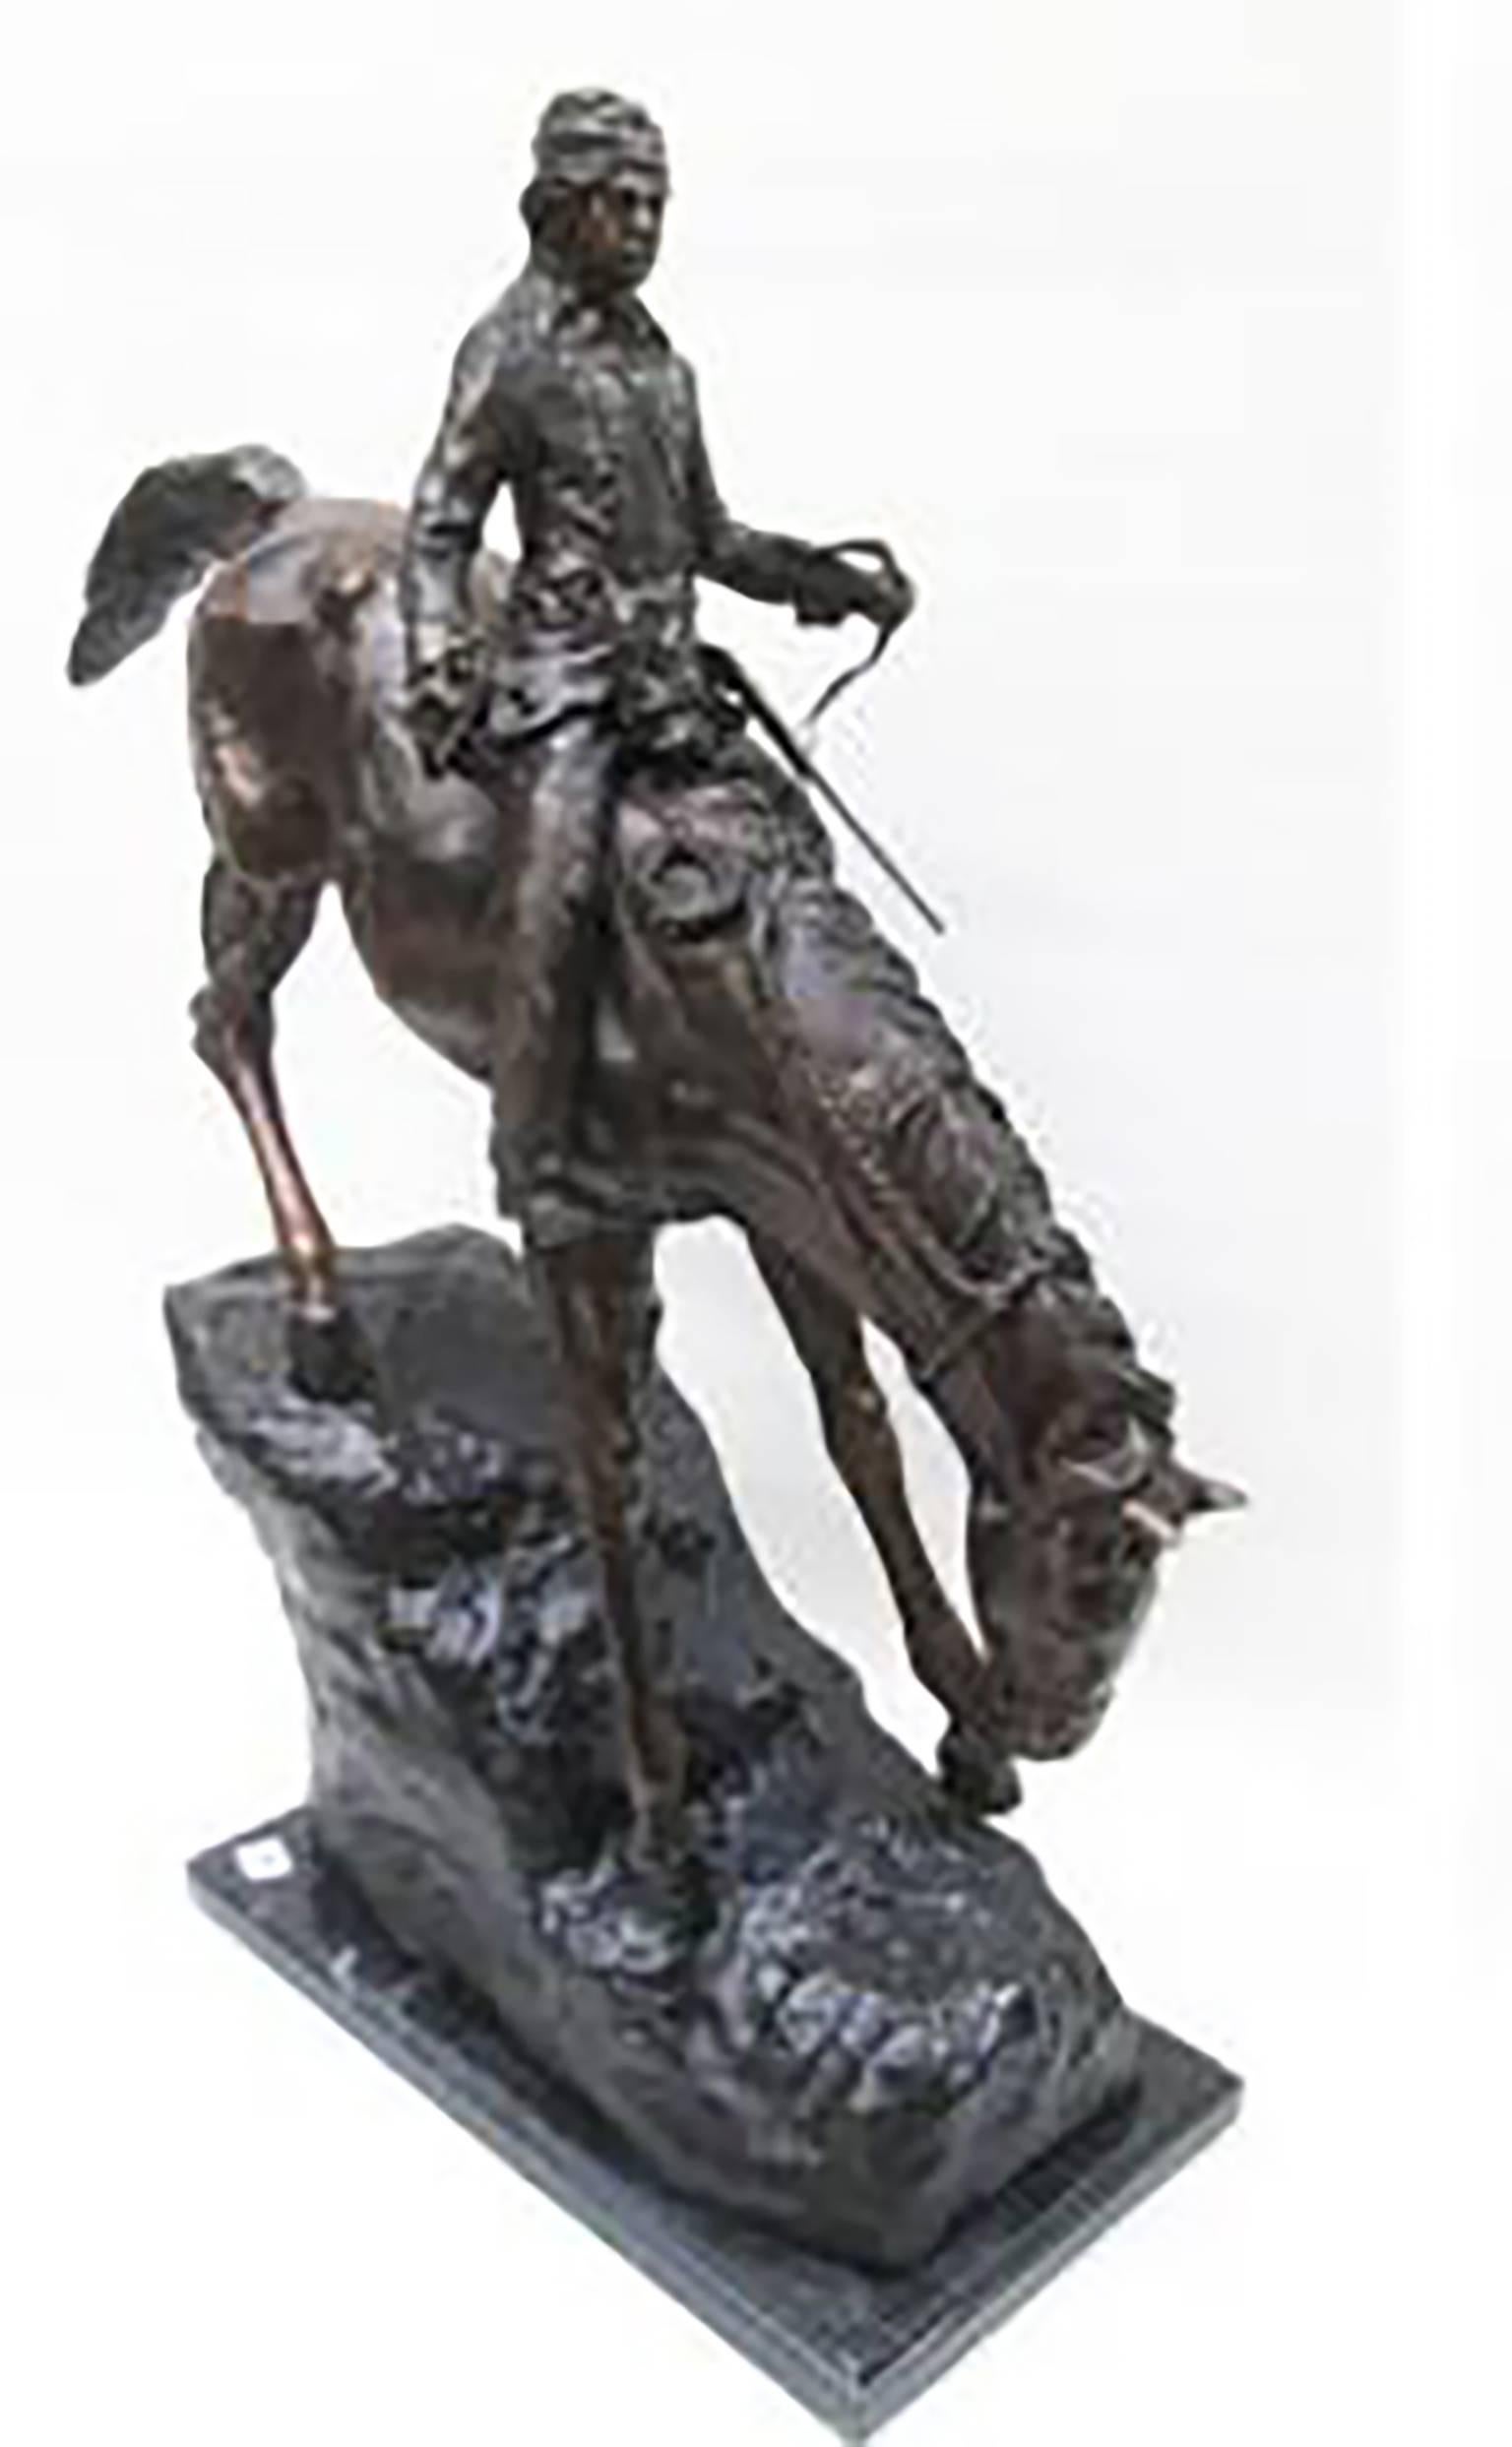 Large Bronze Sculpture After Frederic Remington Entitled “The Mountain Man” - Art by (after) Frederic Remington